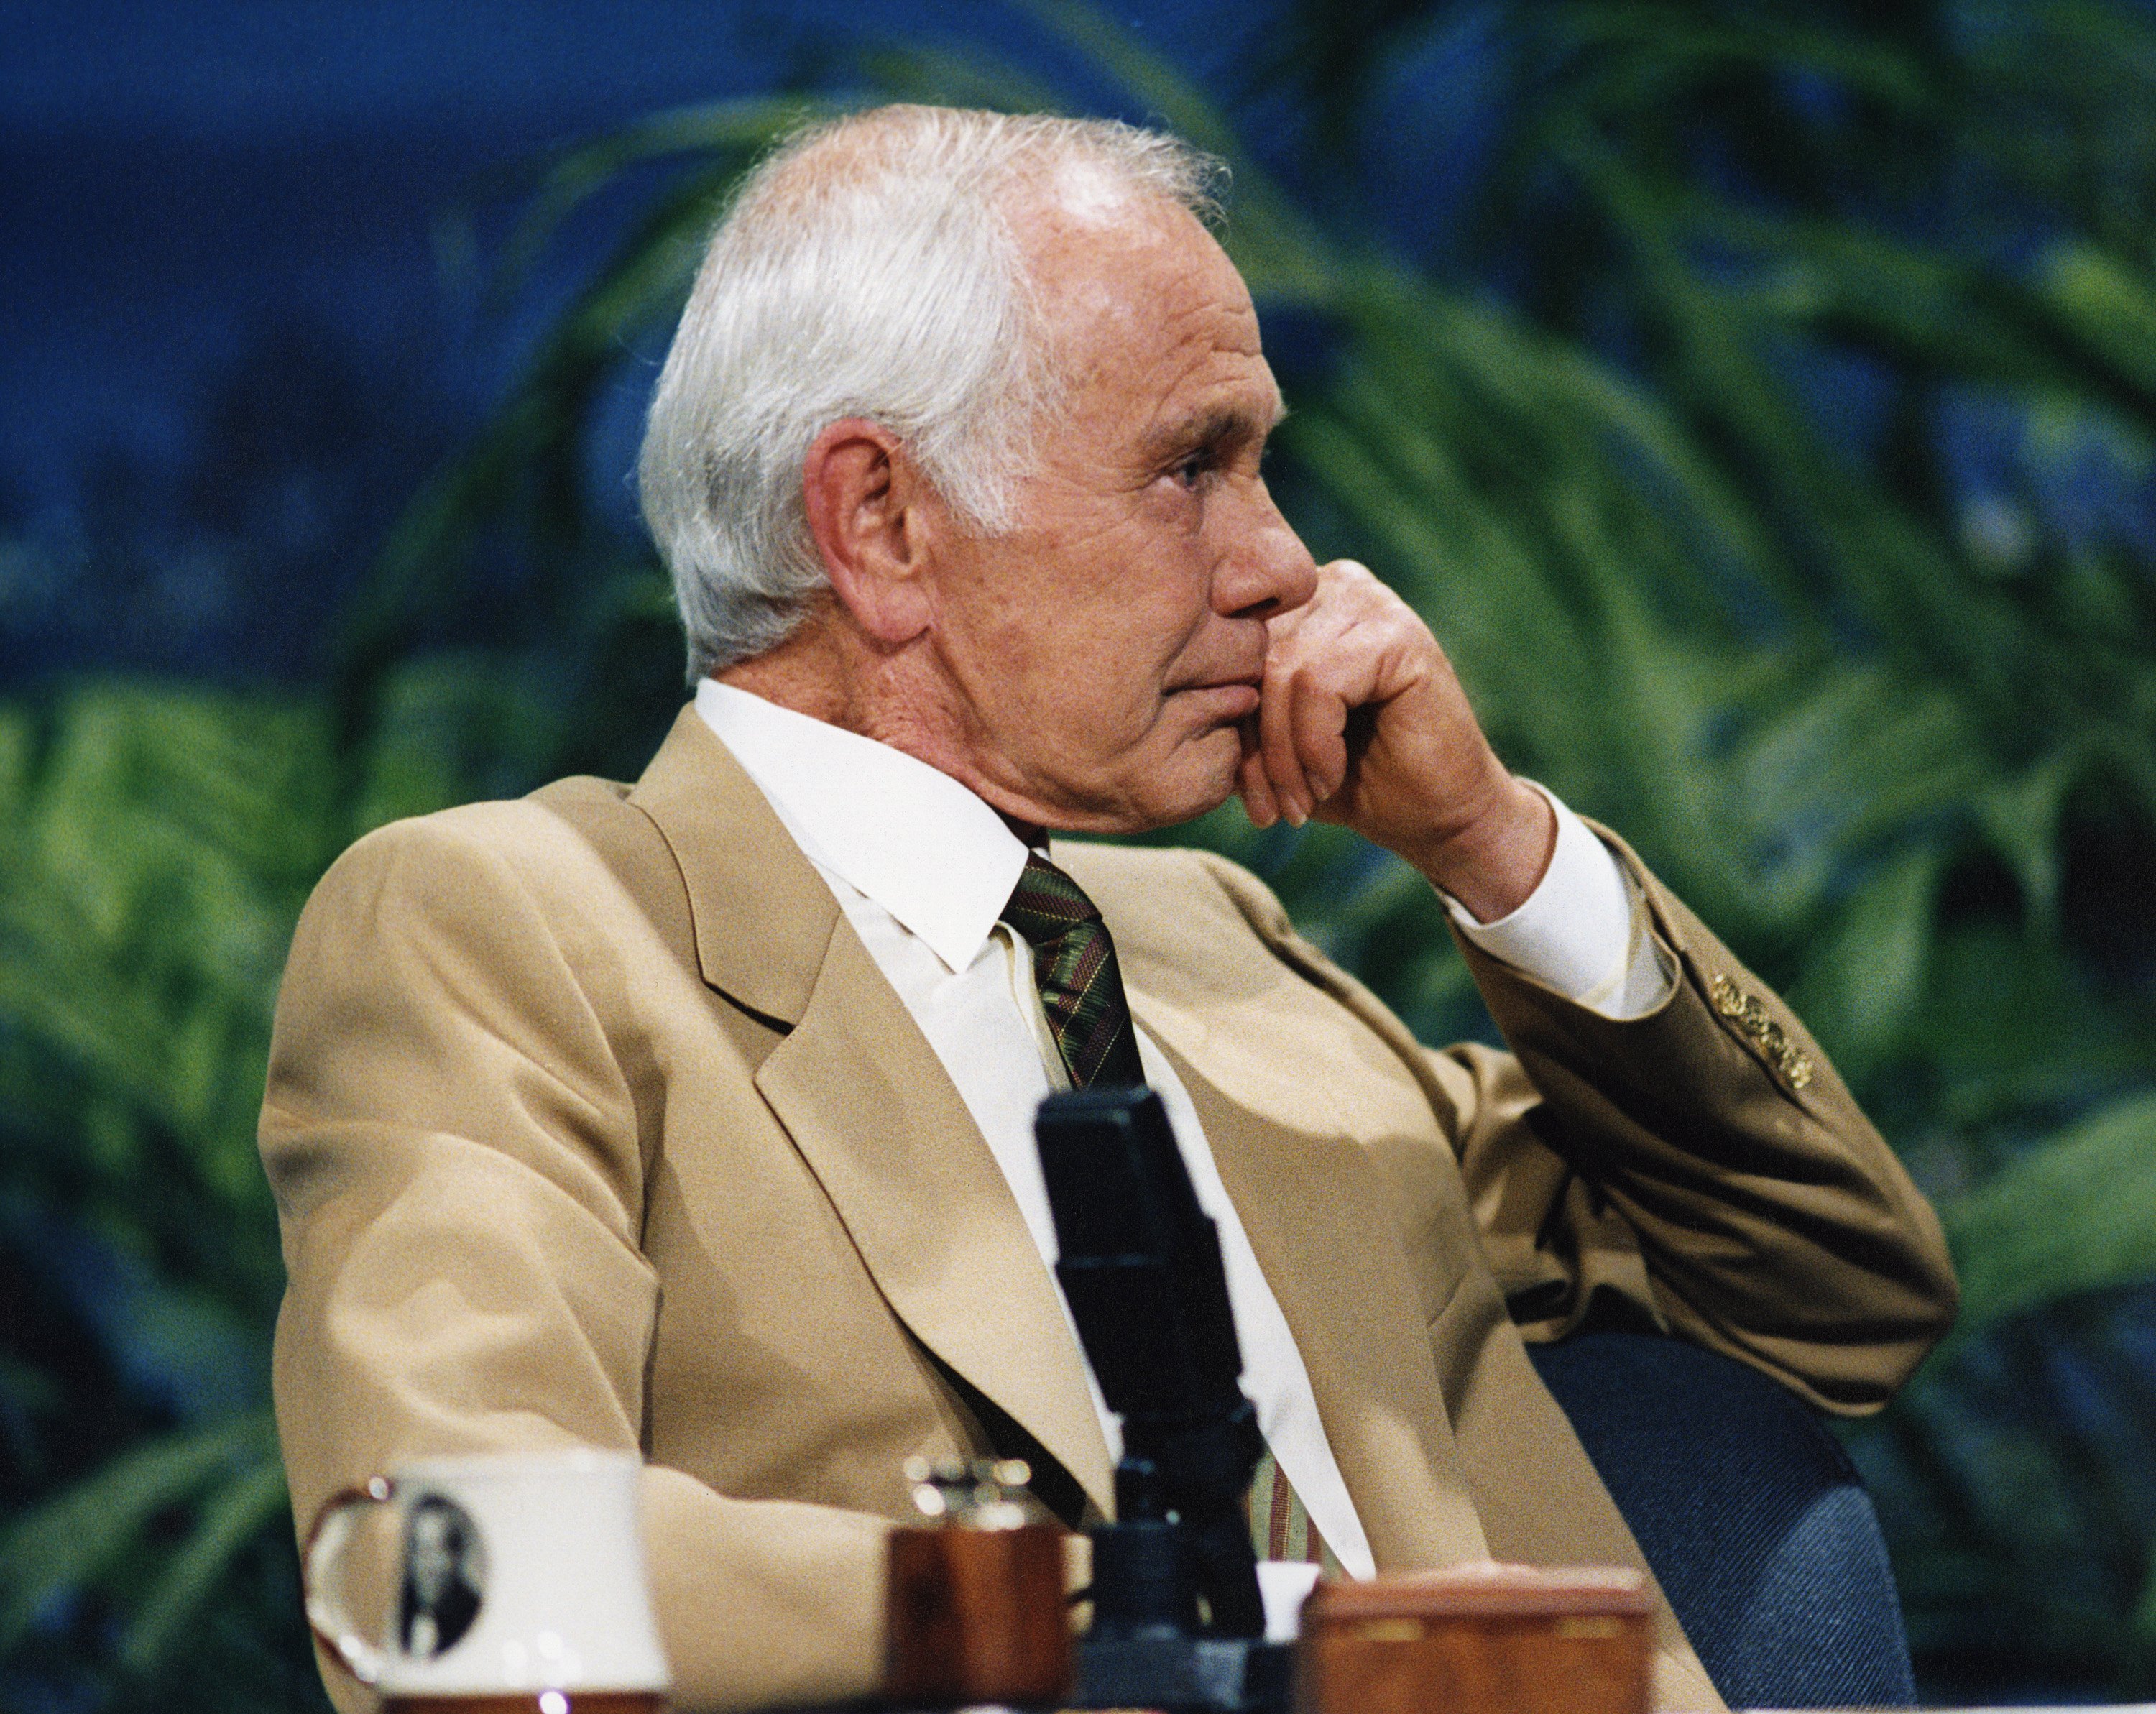 Johnny Carson at the "The Tonight Show Starring Johnny Carson," on May, 21, 1992. | Source: Getty Images